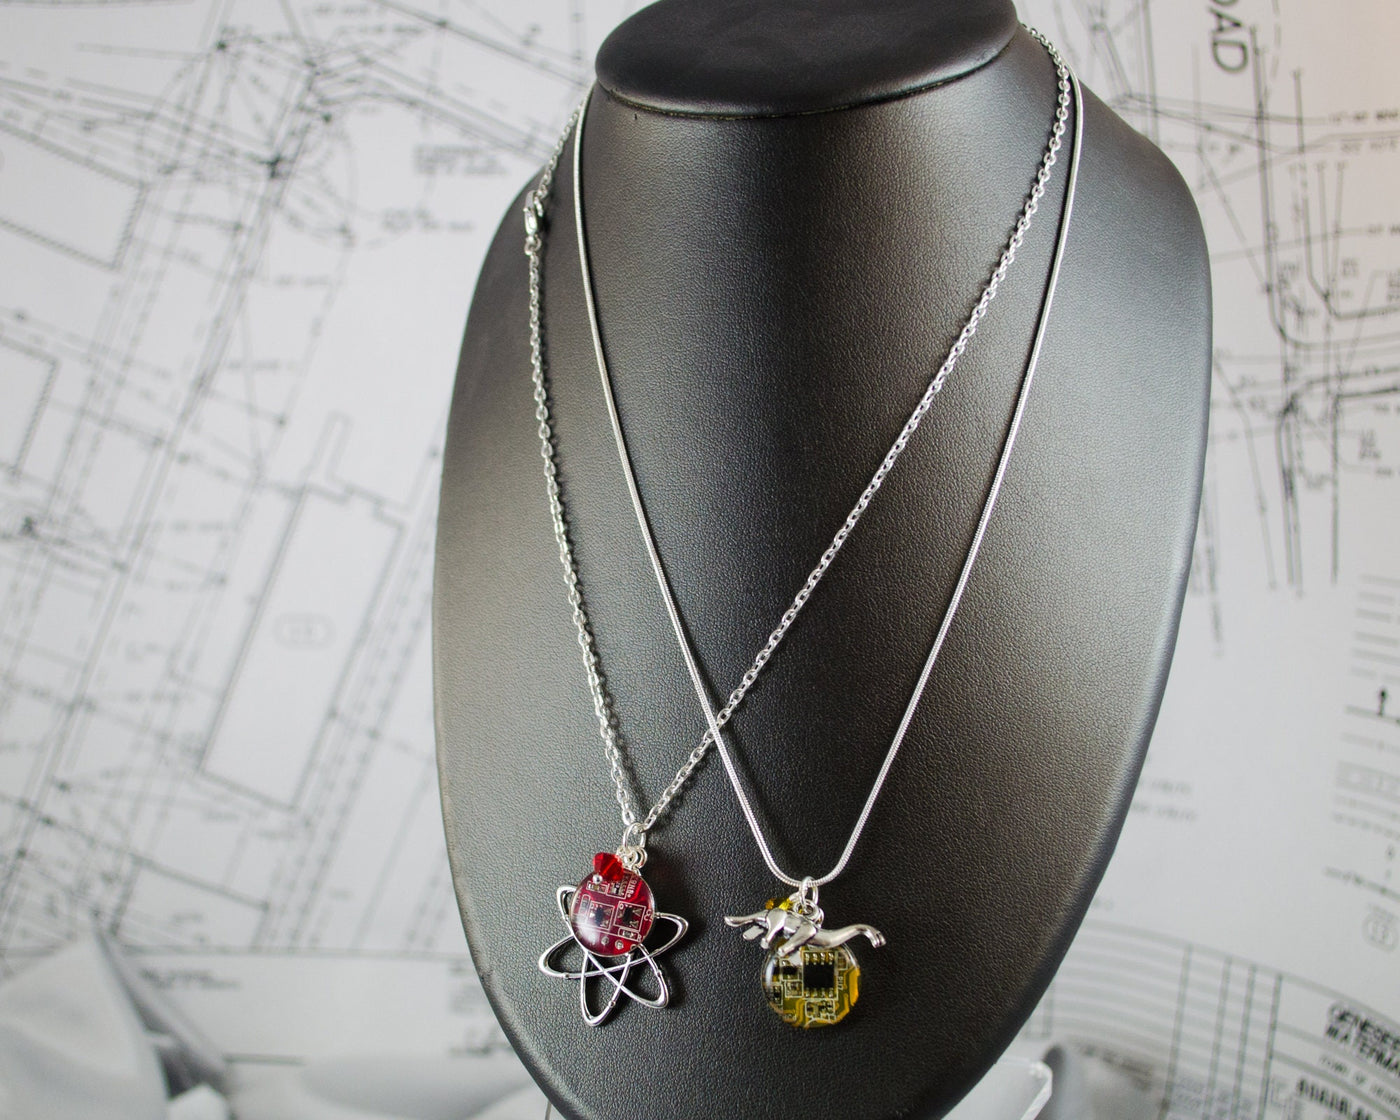 CHOOSE COLOR Erlenmeyer Flask and Circuit Board Charm Necklace, Jewelry for Scientists